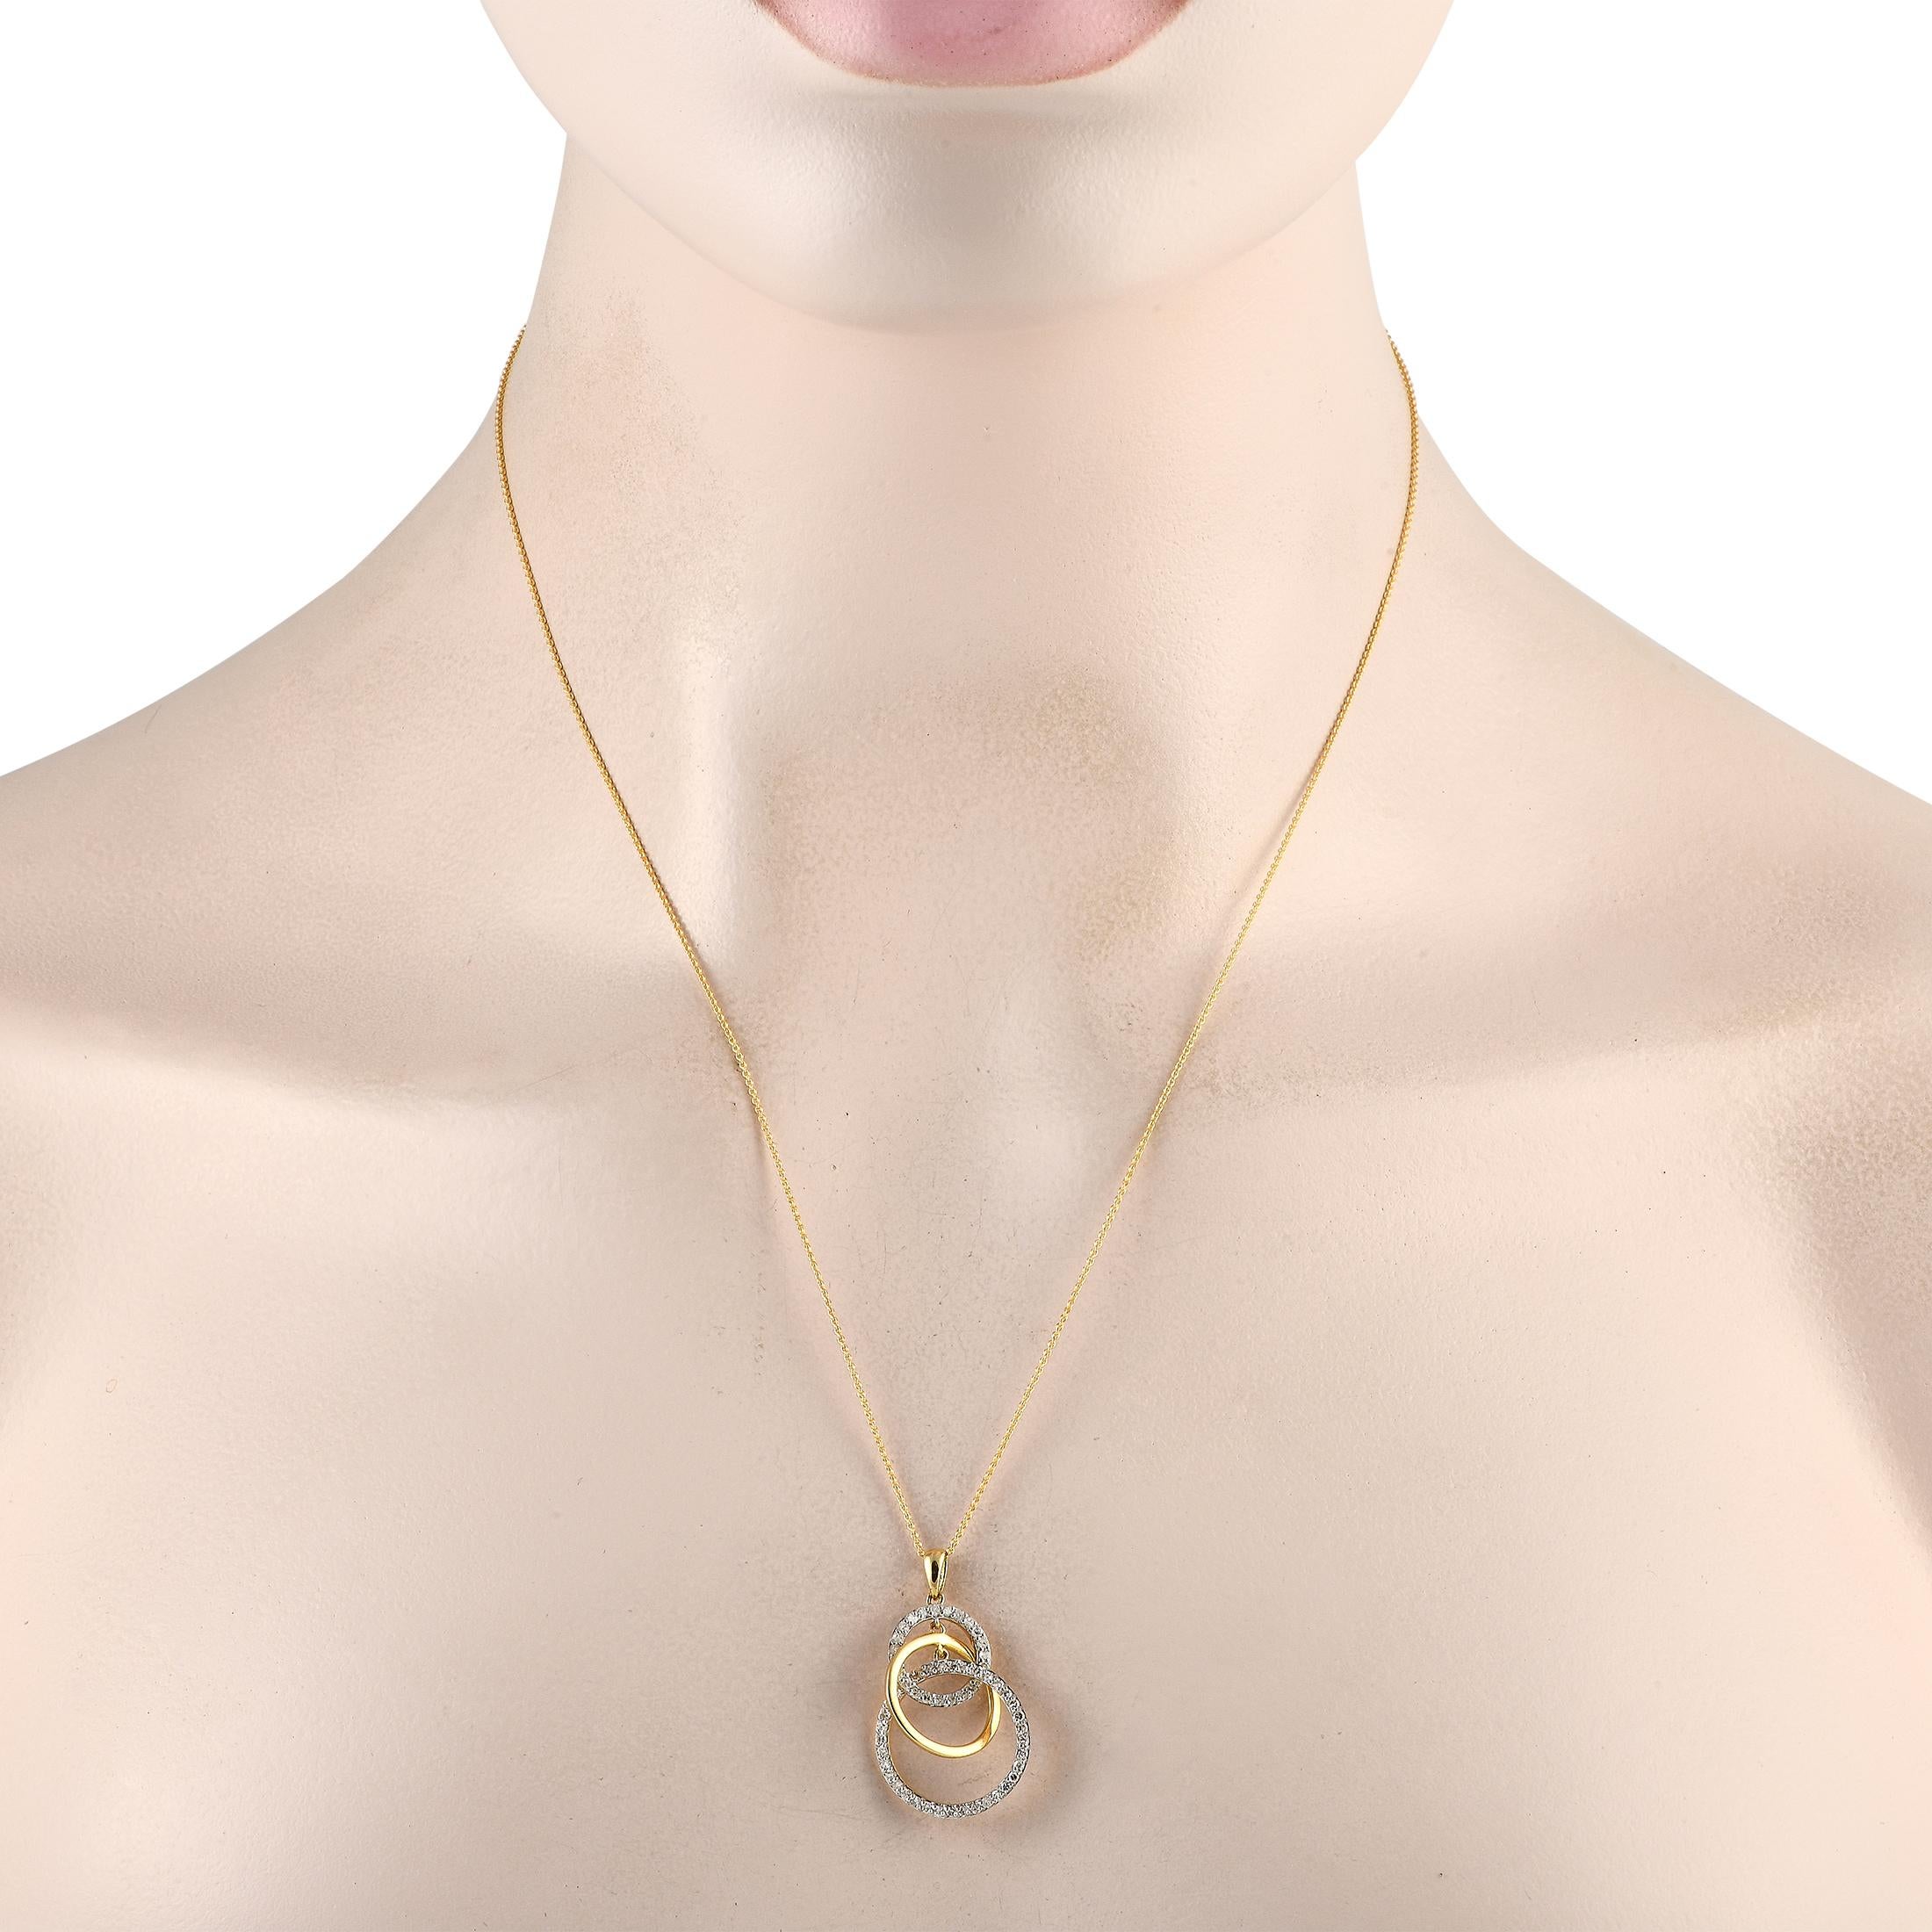 A trio of interlocking circular elements allow this necklace to instantly capture your imagination. Suspended from a 20 chain, youll find a dynamic pendant measuring 1.25 long by 0.75 wide. Diamonds with a total weight of 0.50 carats add plenty of